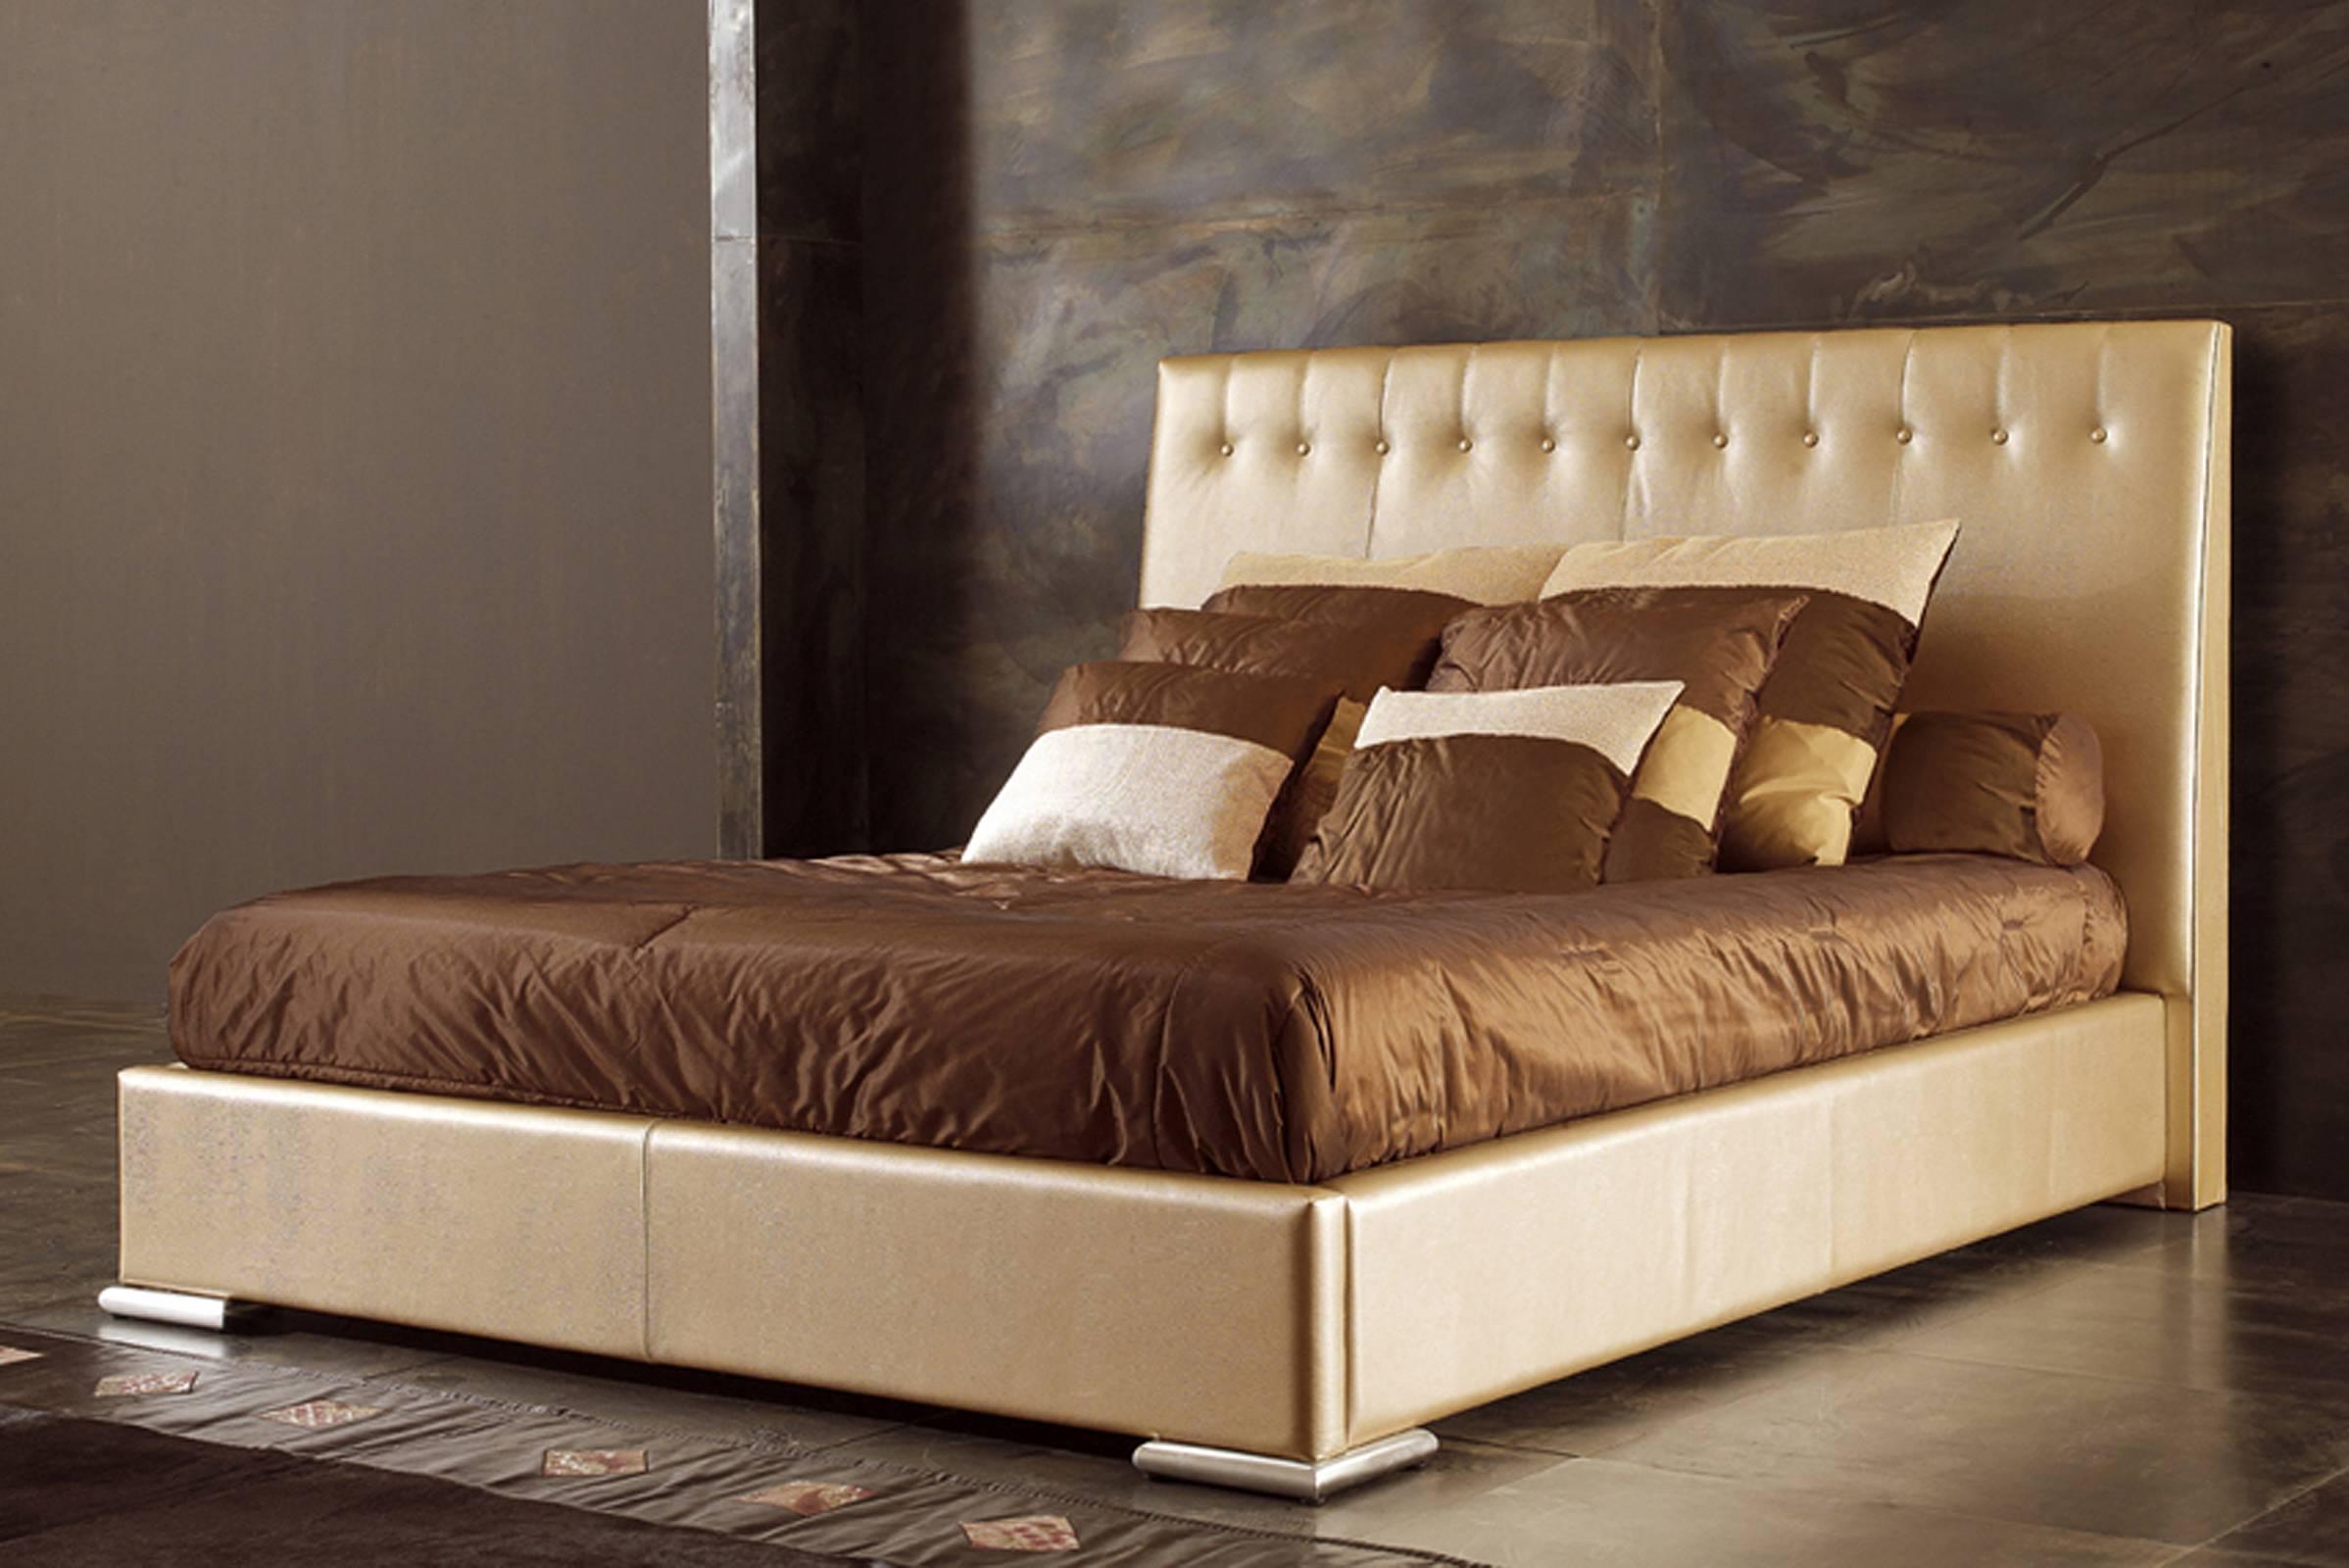 Italian Parma Bed with High Quality Fabric and Night Table Finishing Leather For Sale